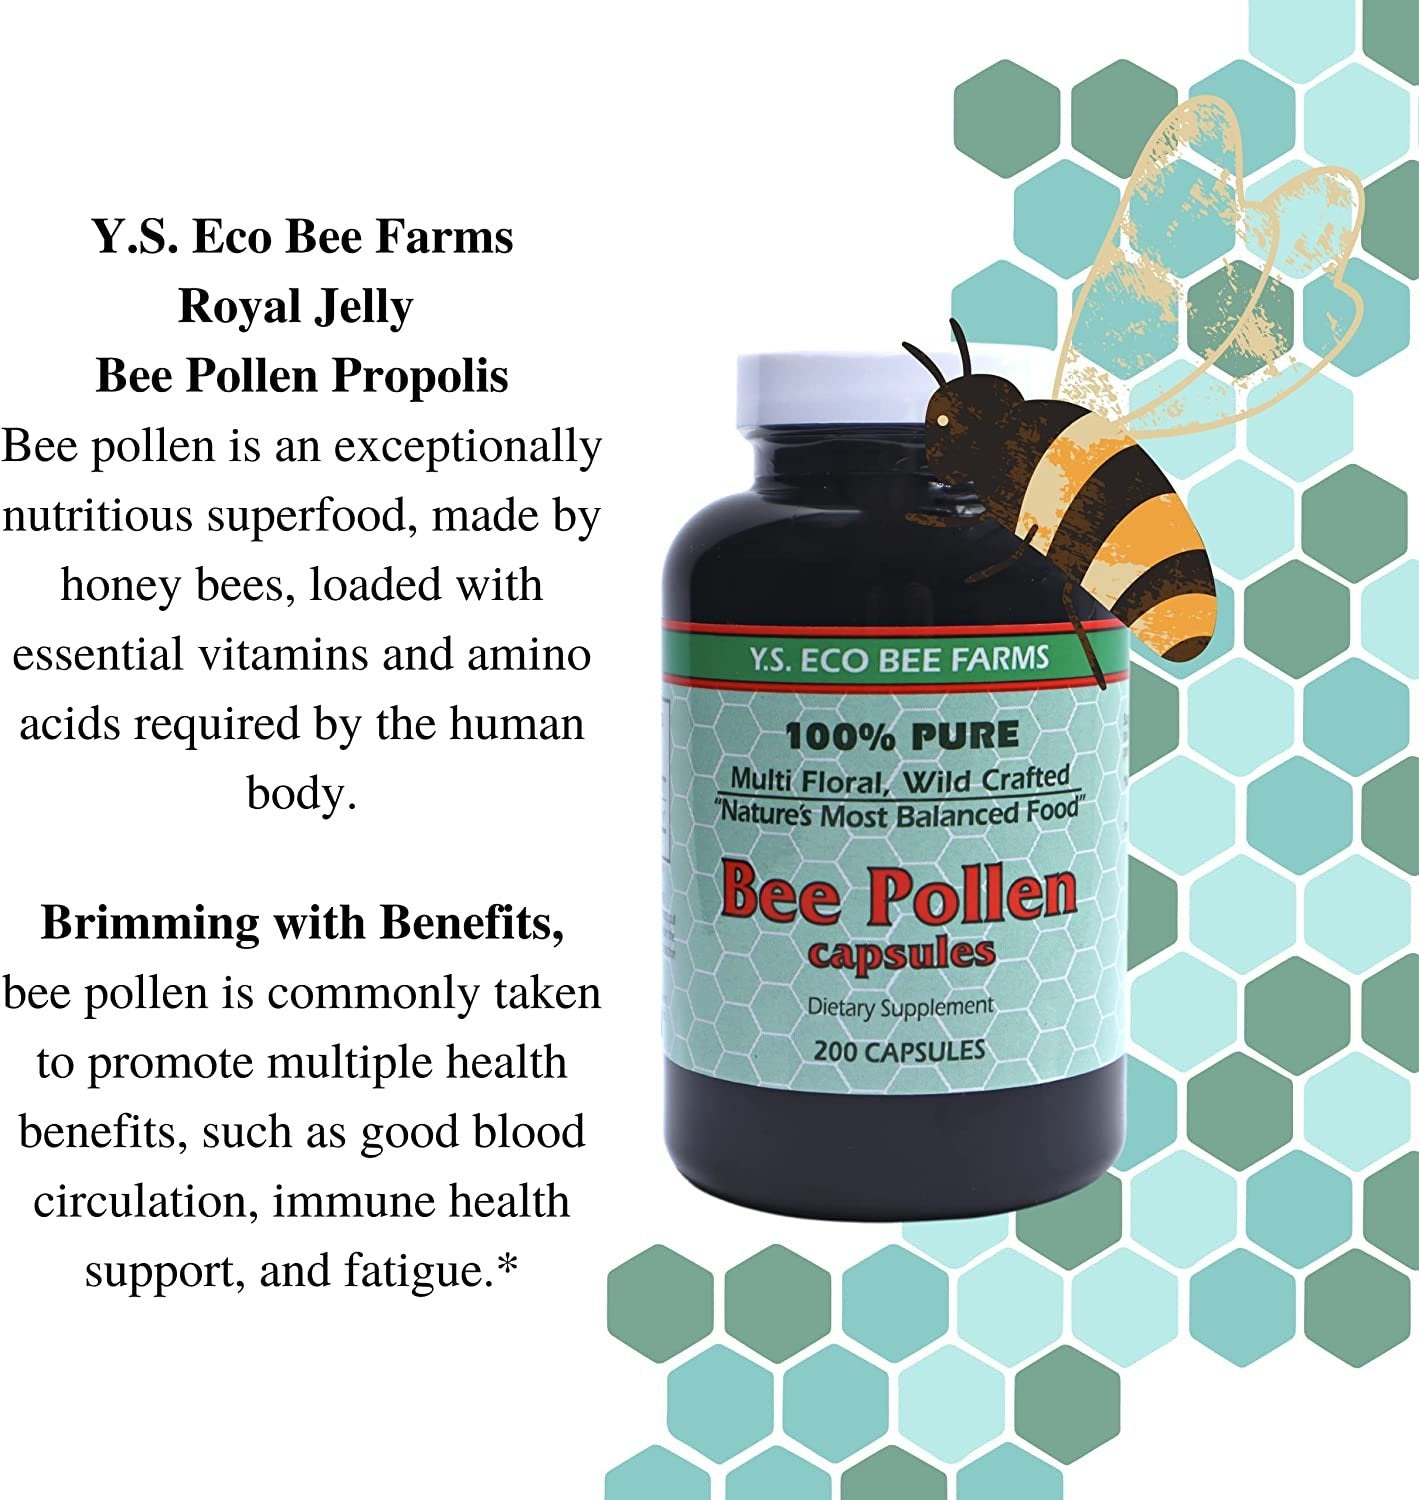 Y.S. Eco Bee Farms 100% Pure Multi Floral, Wild Crafted Bee Pollen Capsules - 200 Count - Organic Bee Pollen Vitamin Supplements for Optimal Health and Wellness